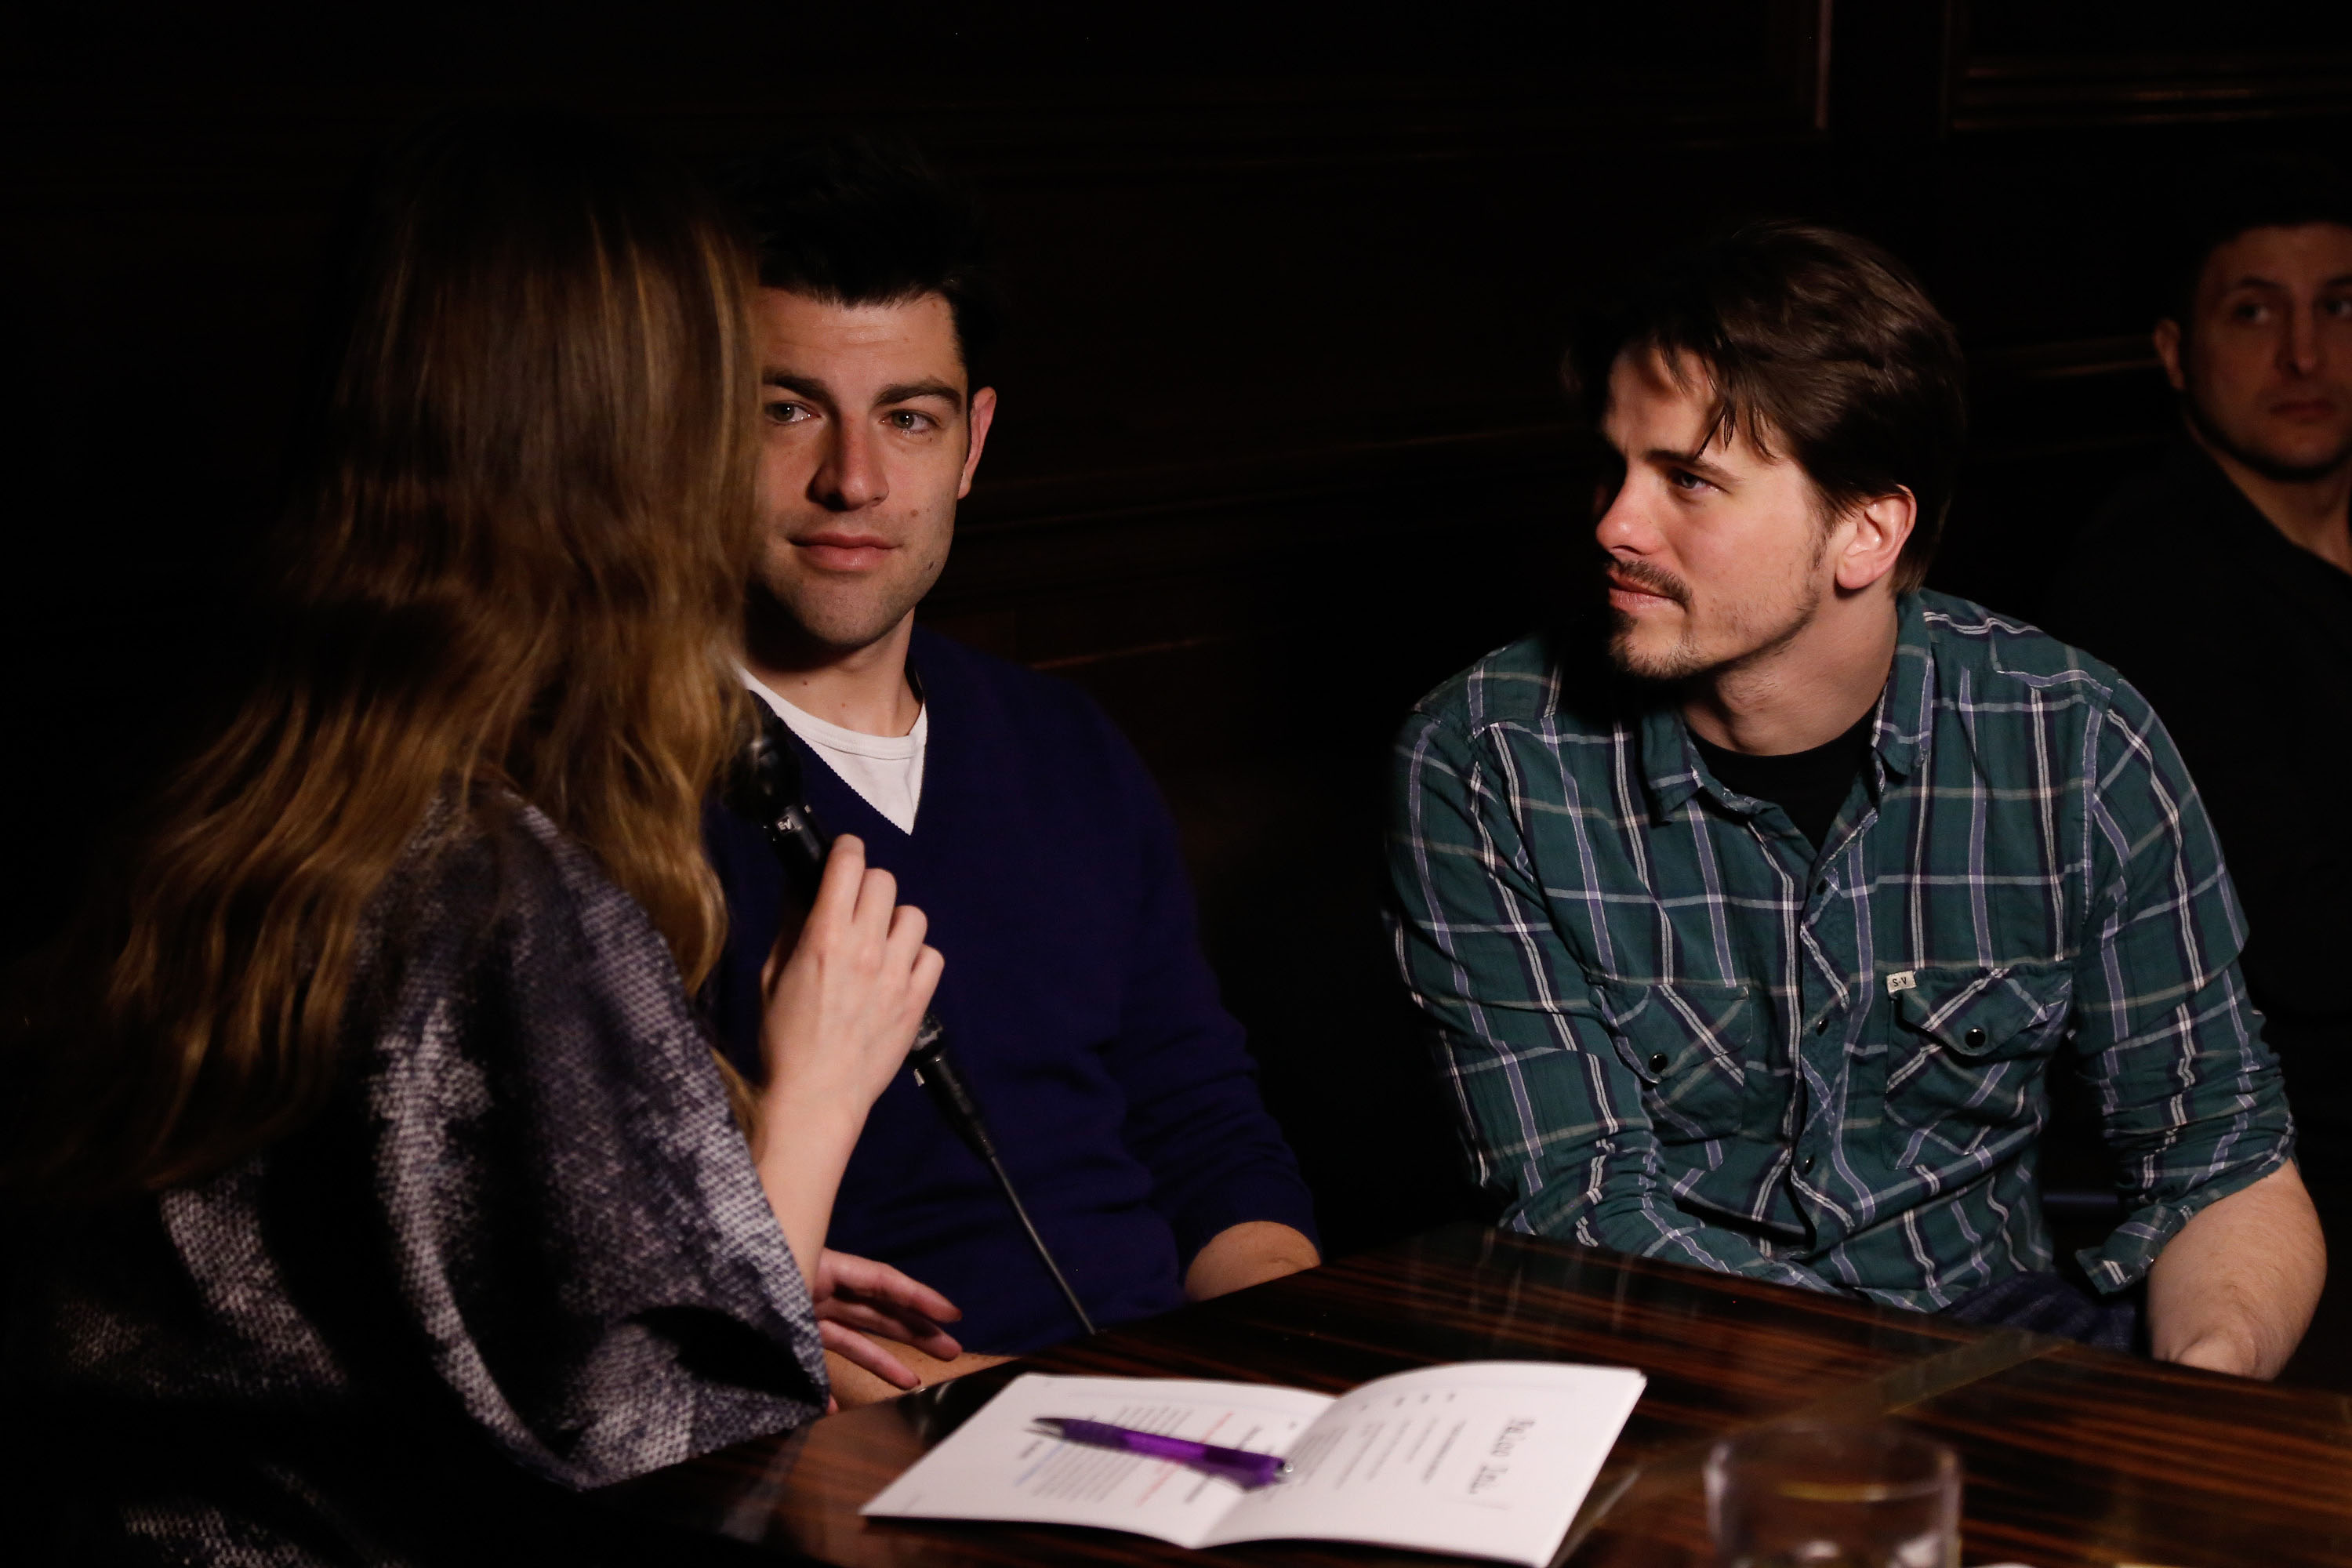 <em>(L-R) – Max Greenfield & Jason Ritter discussing ABOUT ALEX – Photo Credit Tom Concordia/WireImage</em>